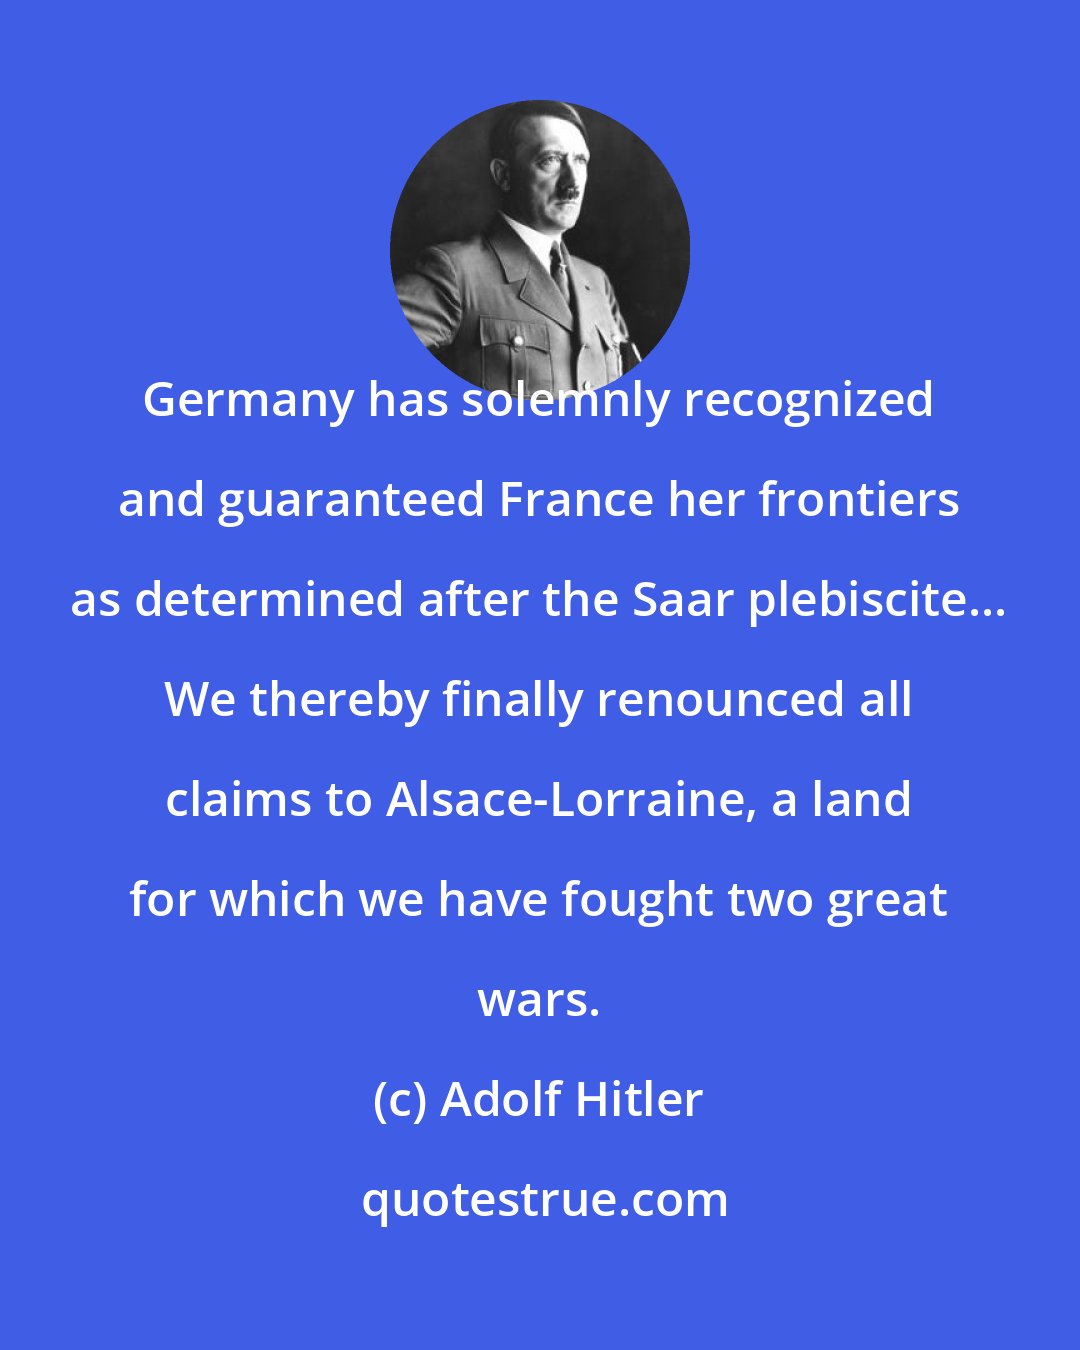 Adolf Hitler: Germany has solemnly recognized and guaranteed France her frontiers as determined after the Saar plebiscite... We thereby finally renounced all claims to Alsace-Lorraine, a land for which we have fought two great wars.